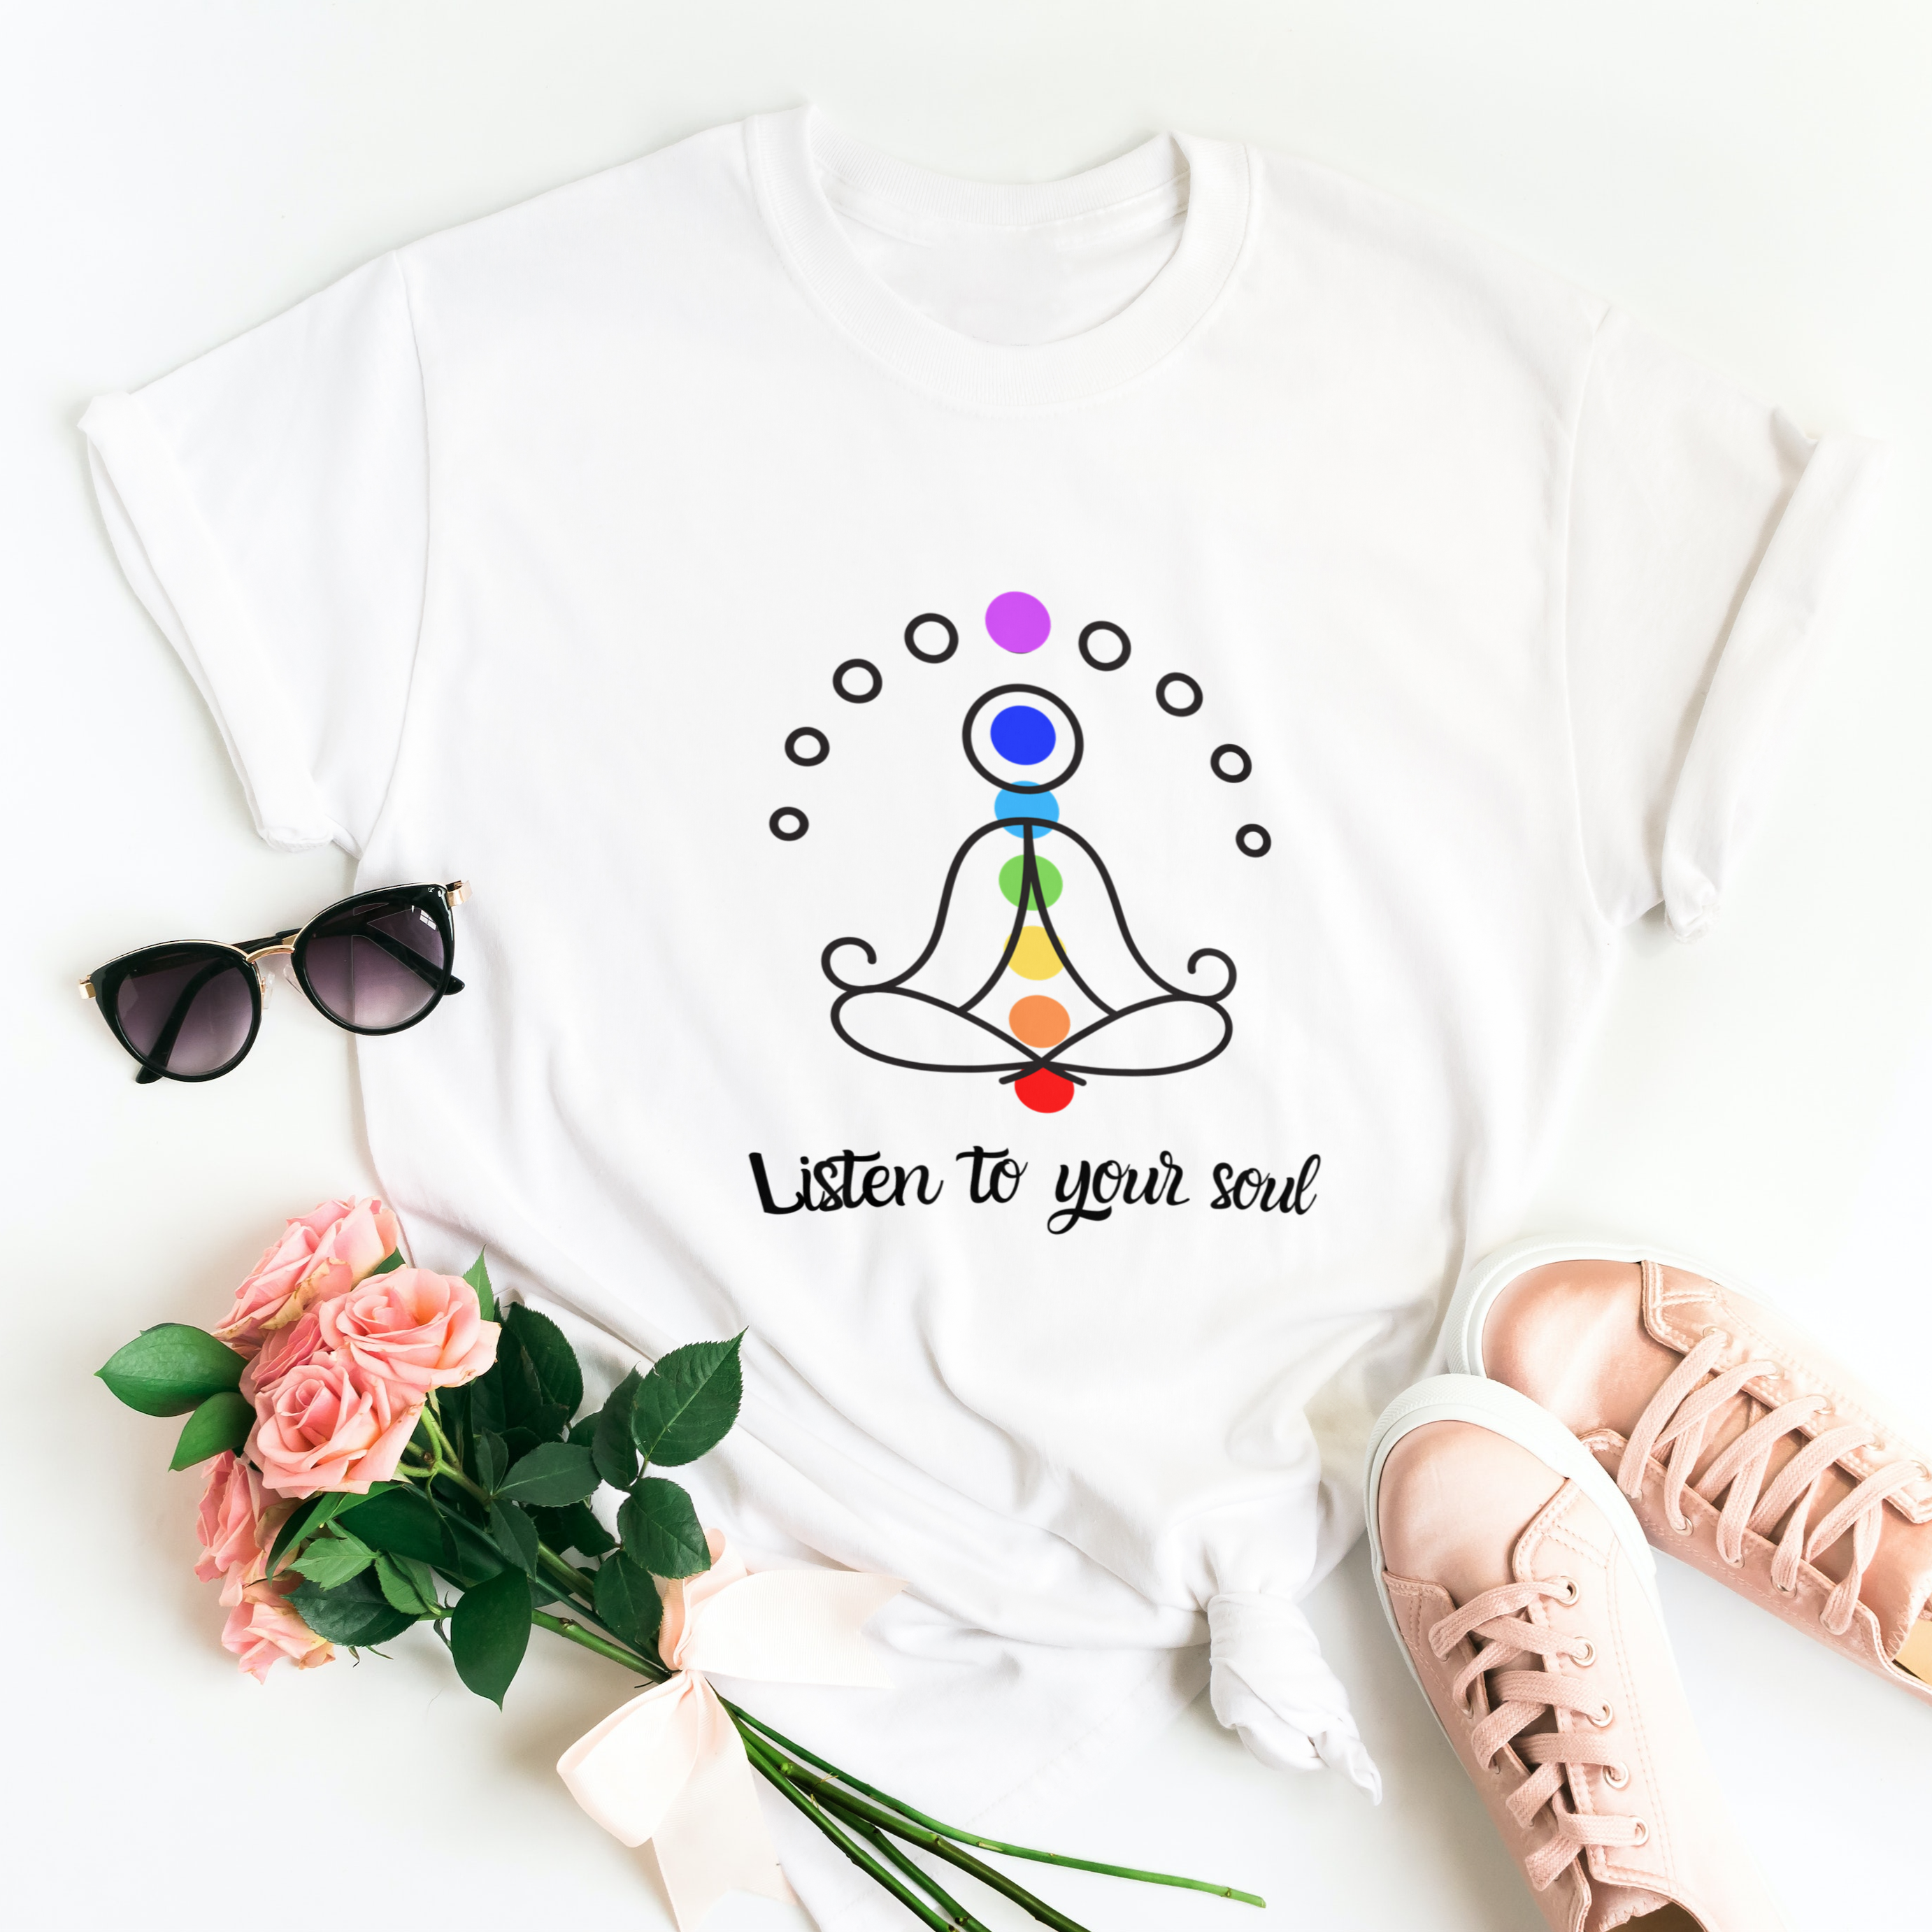 Story of Awakening Lifestyle Community Spirituality Relationships Love Light Meditation Oneness Earth Balance Healing Shop Store Charity Tree Nature Read Write T shirt Tops Tees Clothing Women Horoscope Organic Cotton Listen To Your Soul Quote